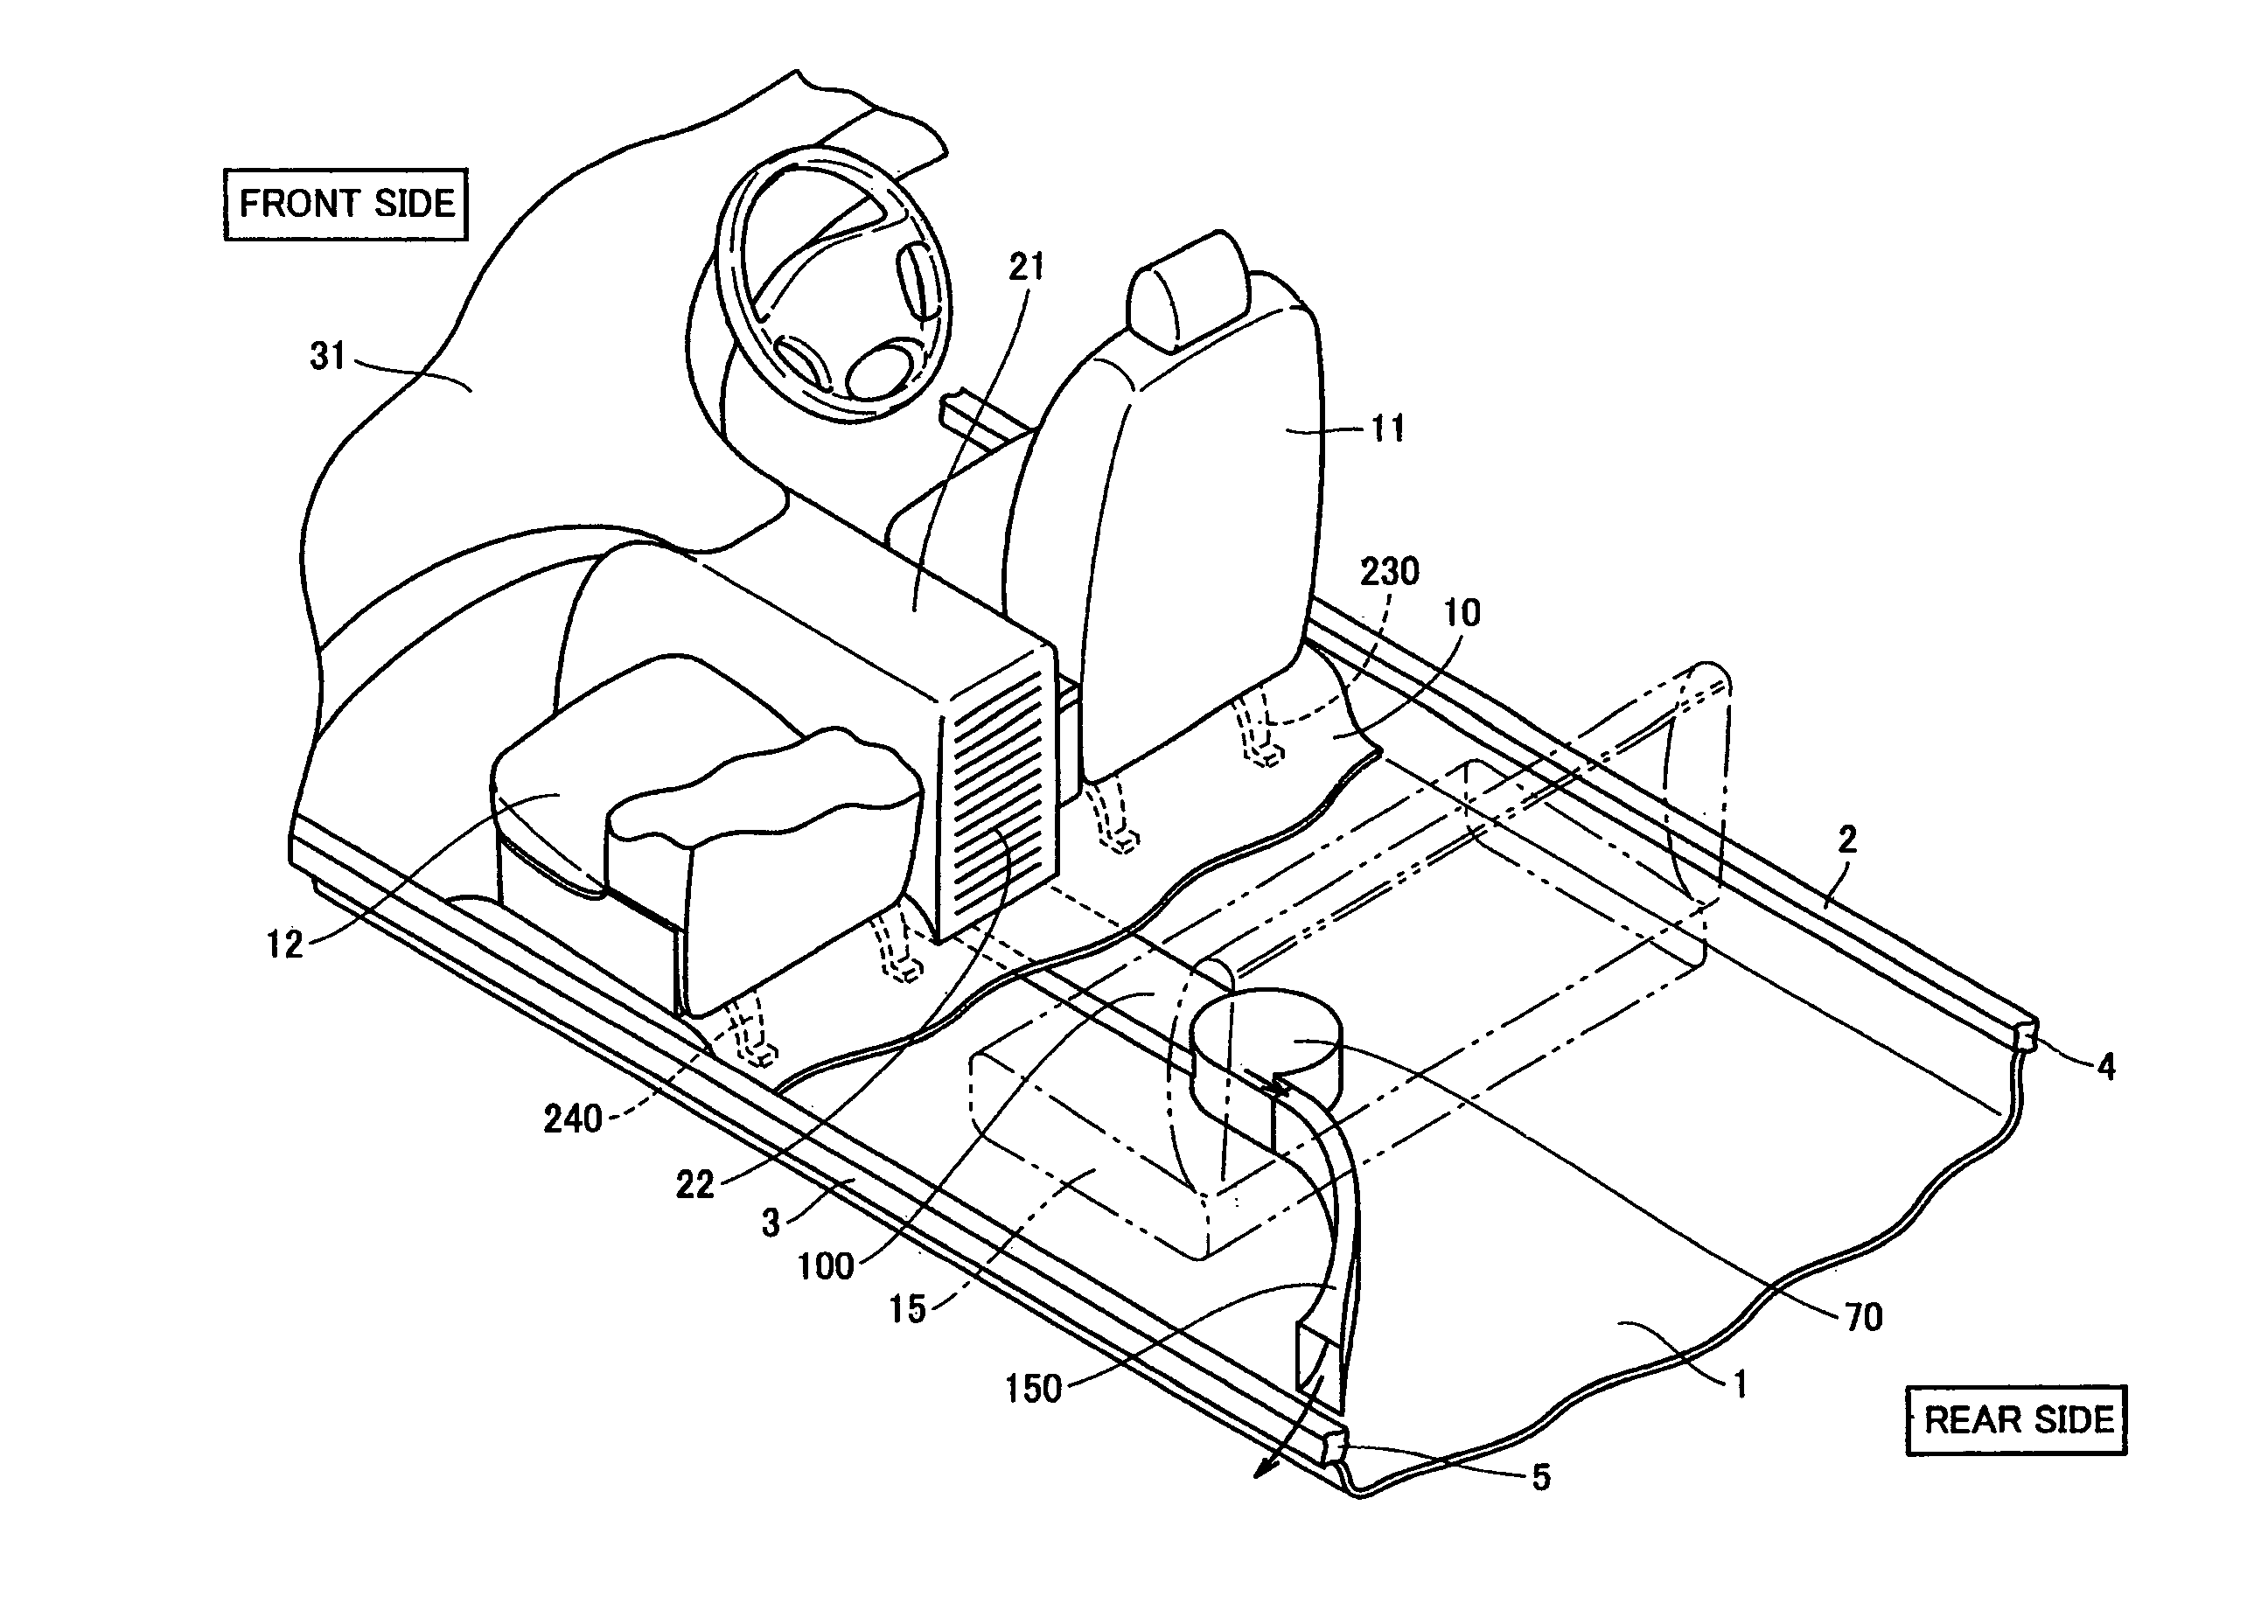 Vehicle-mounted battery cooling structure